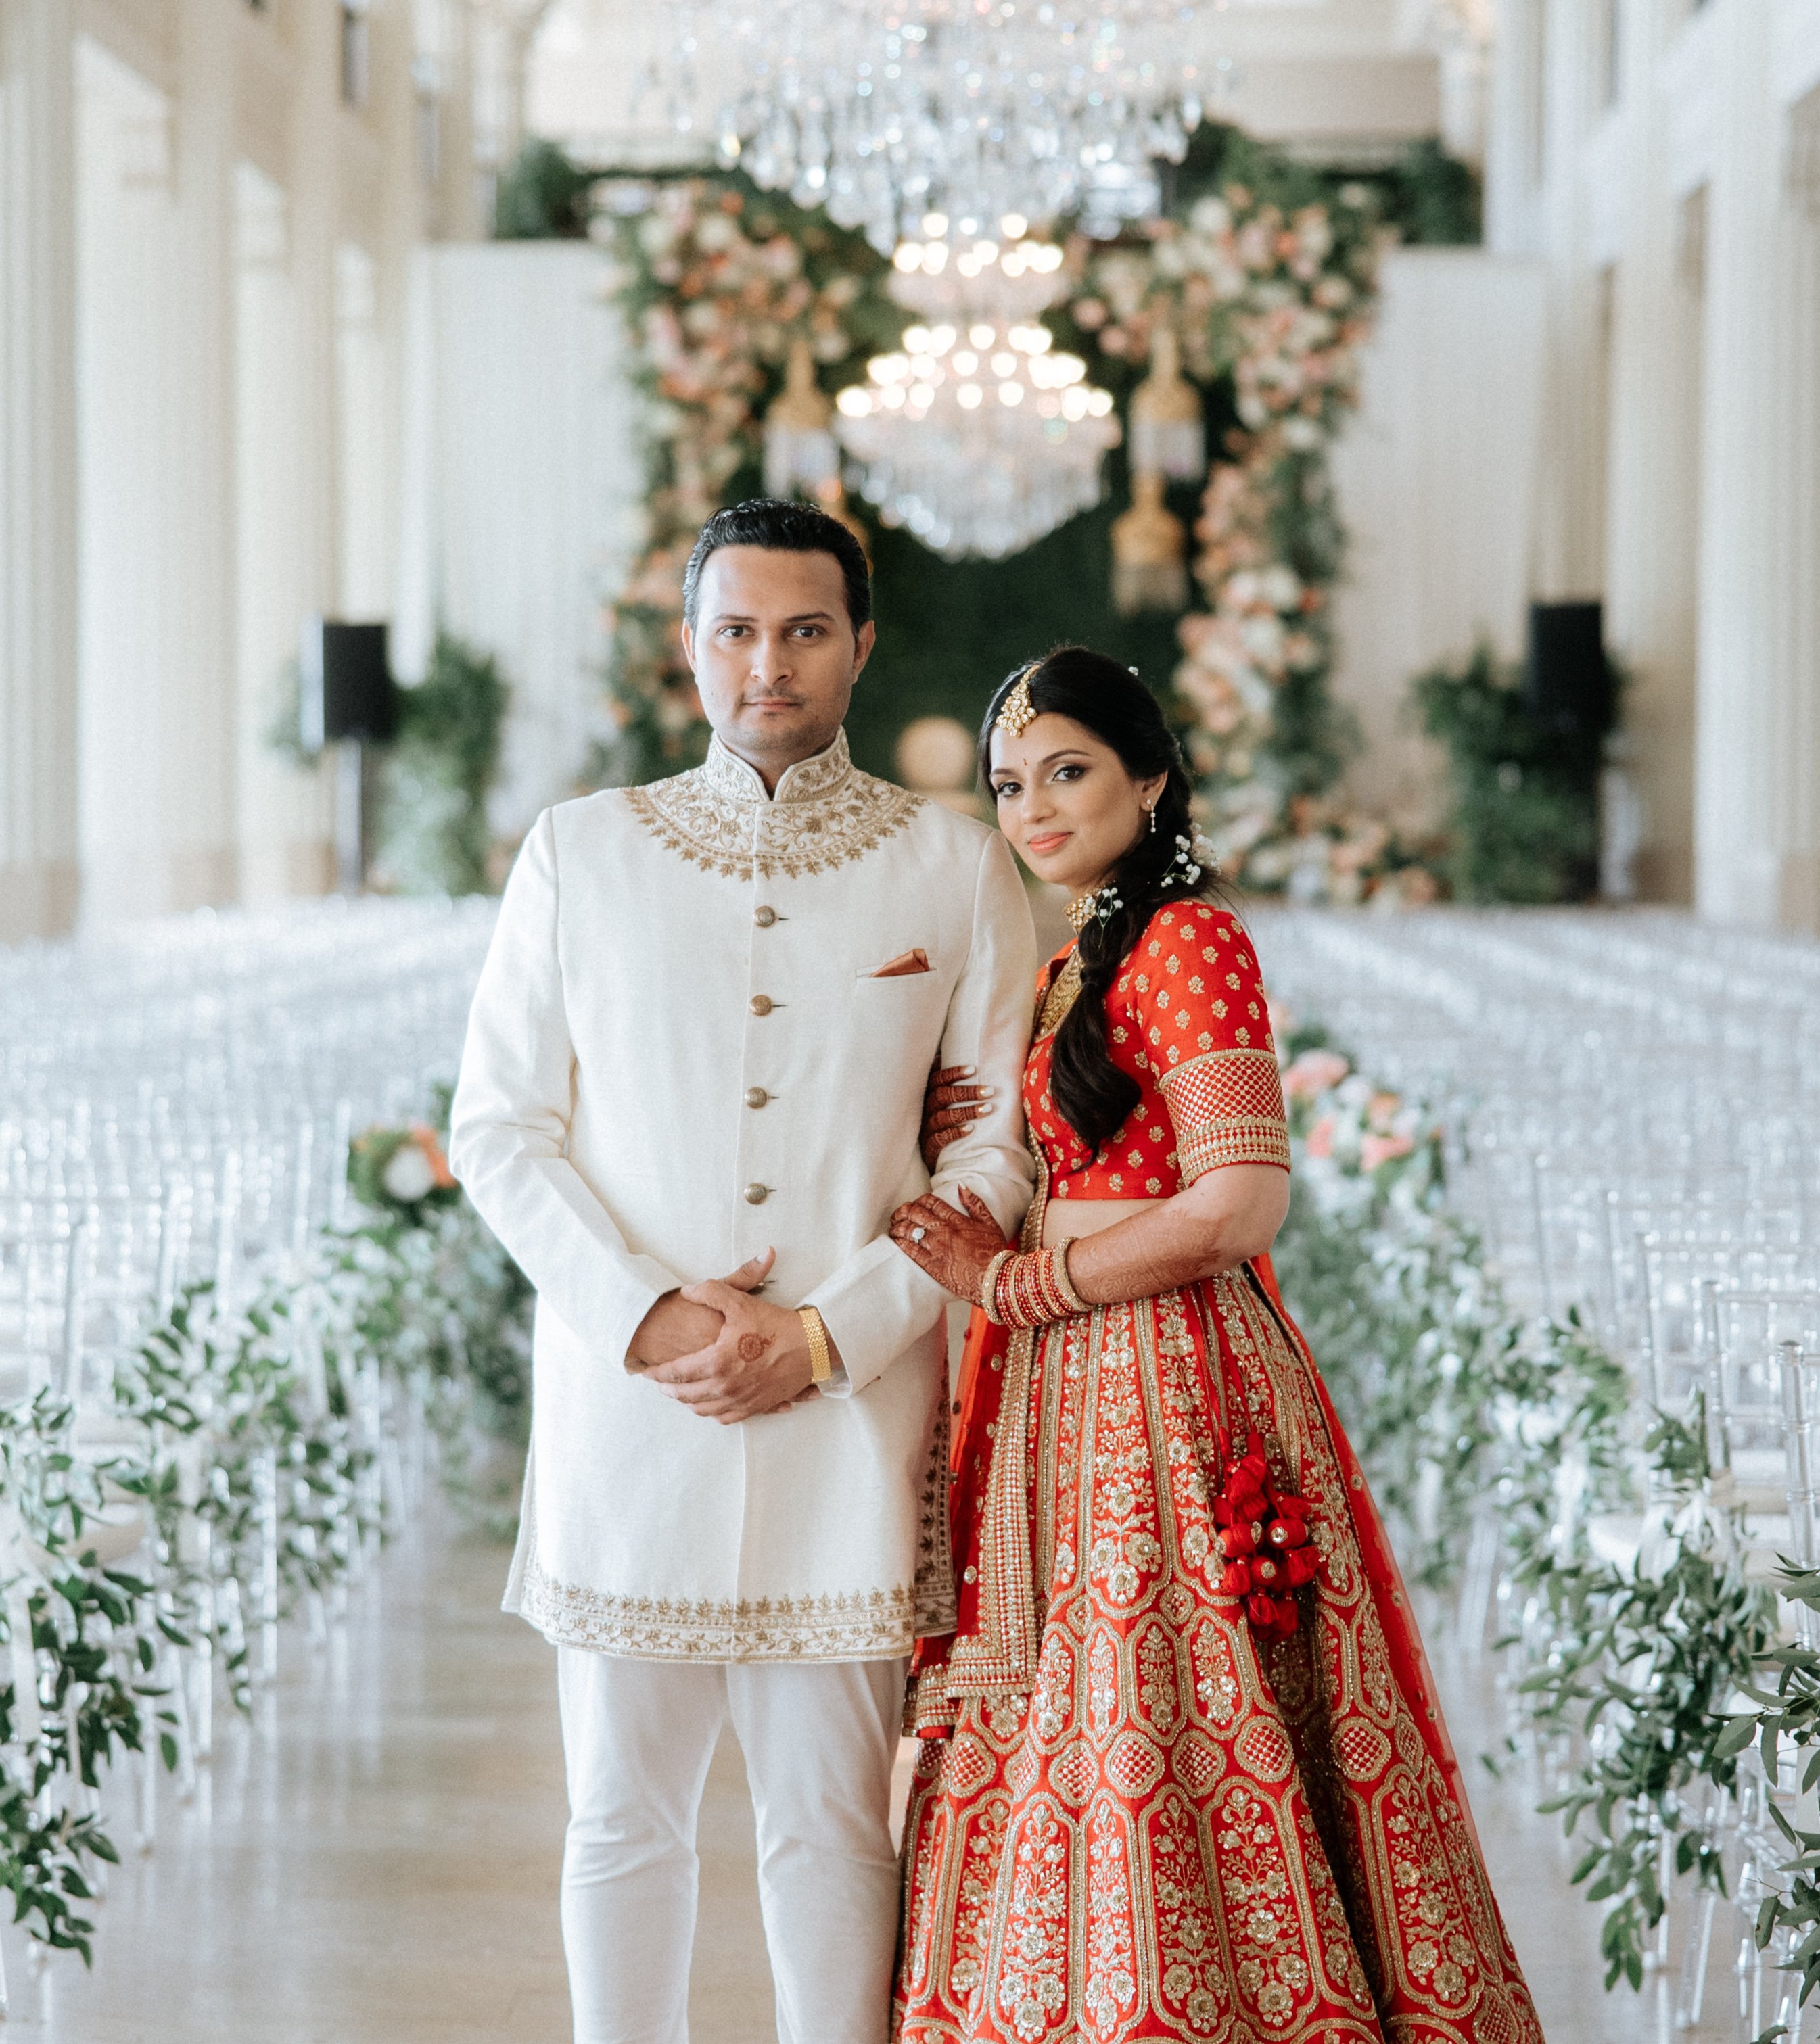 Take This Indian Wedding Dress Quiz To Find Your Perfect Bridal Lehenga